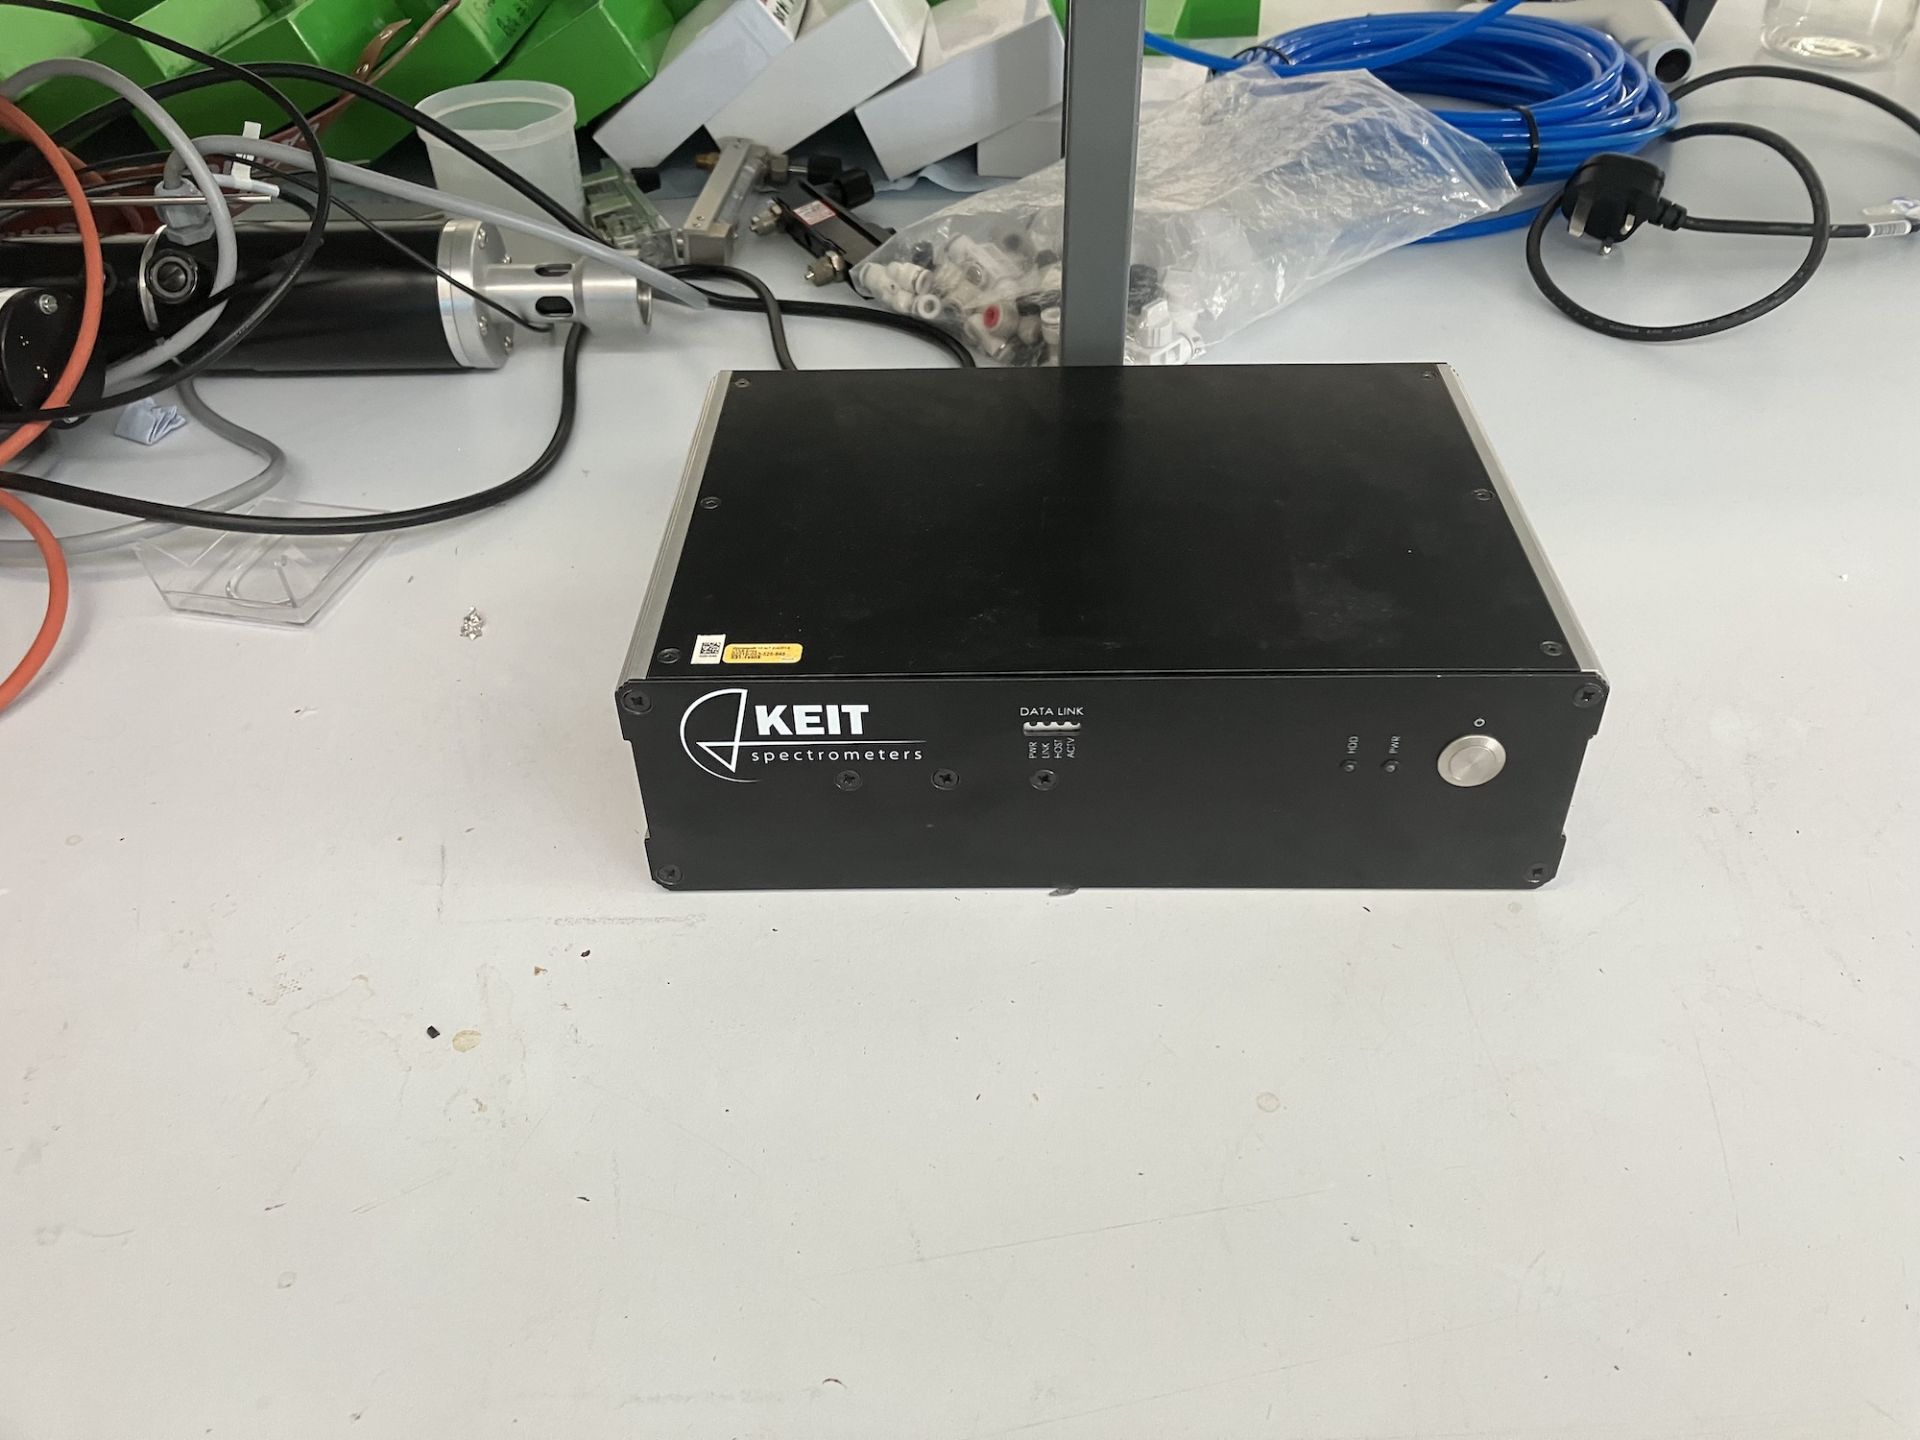 Keit spectrometer datalink box with Smart UPS 750 - Image 2 of 3